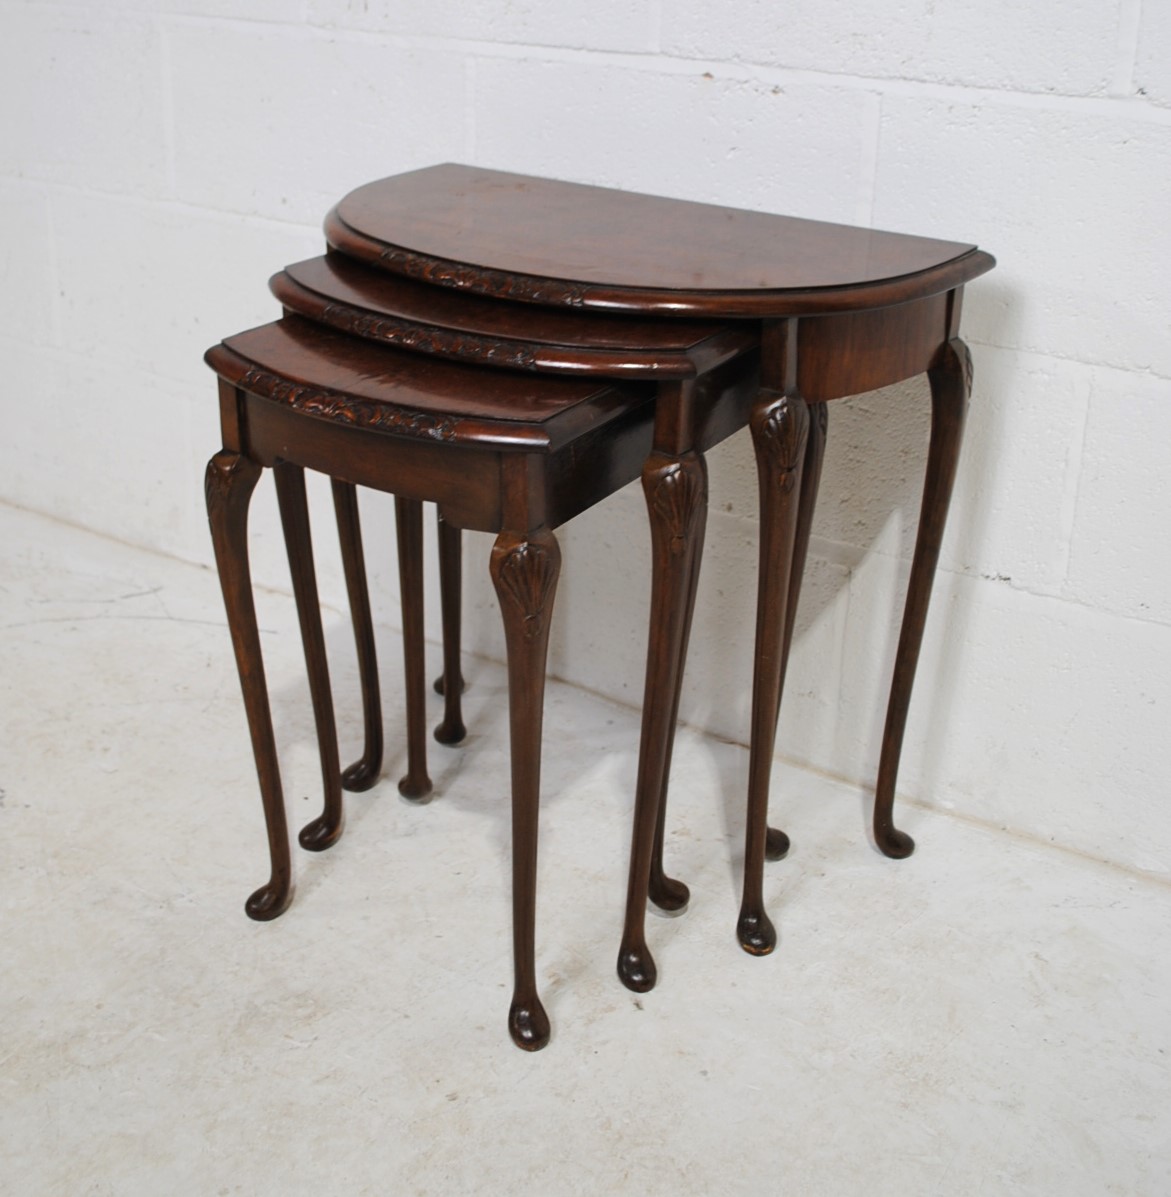 A walnut veneered nest of three demi-lune tables, with carved decoration, raised in cabriole legs - Image 3 of 6